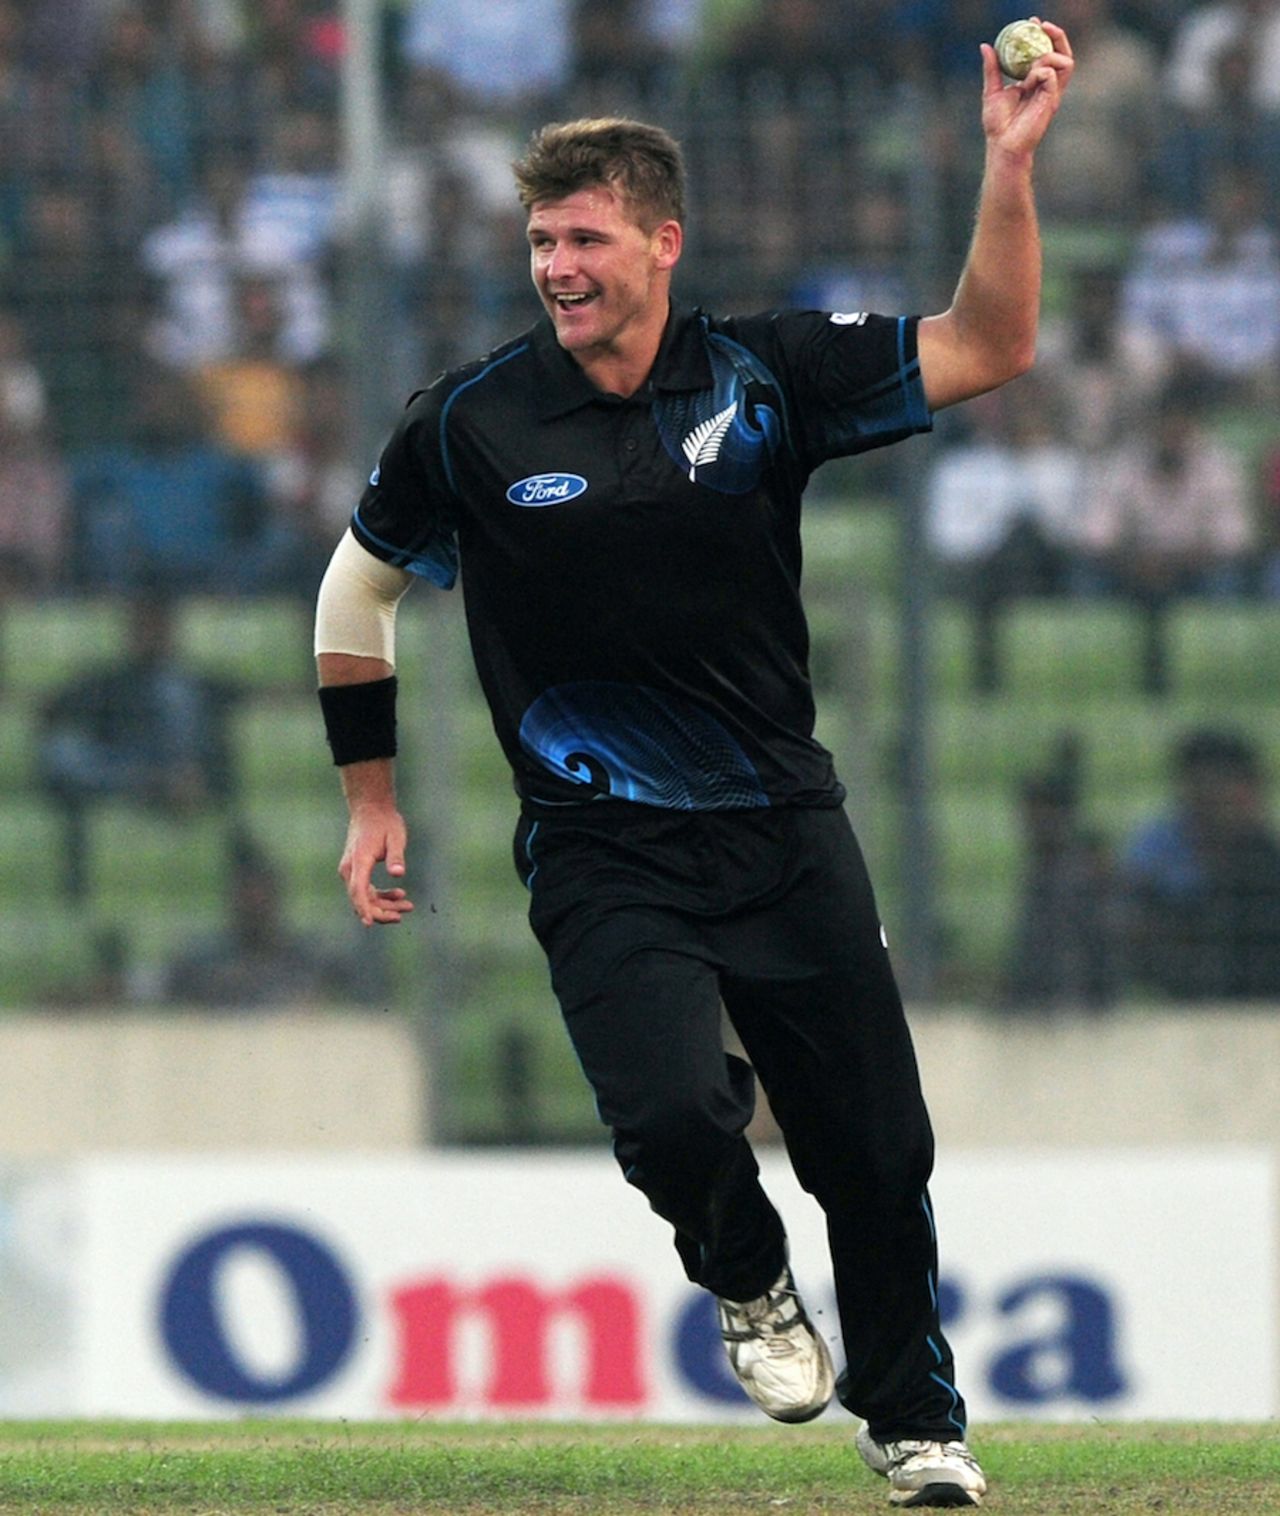 Corey Anderson reacts after taking a catch off his own bowling, Bangladesh v New Zealand, 2nd ODI, Mirpur, October 31, 2013